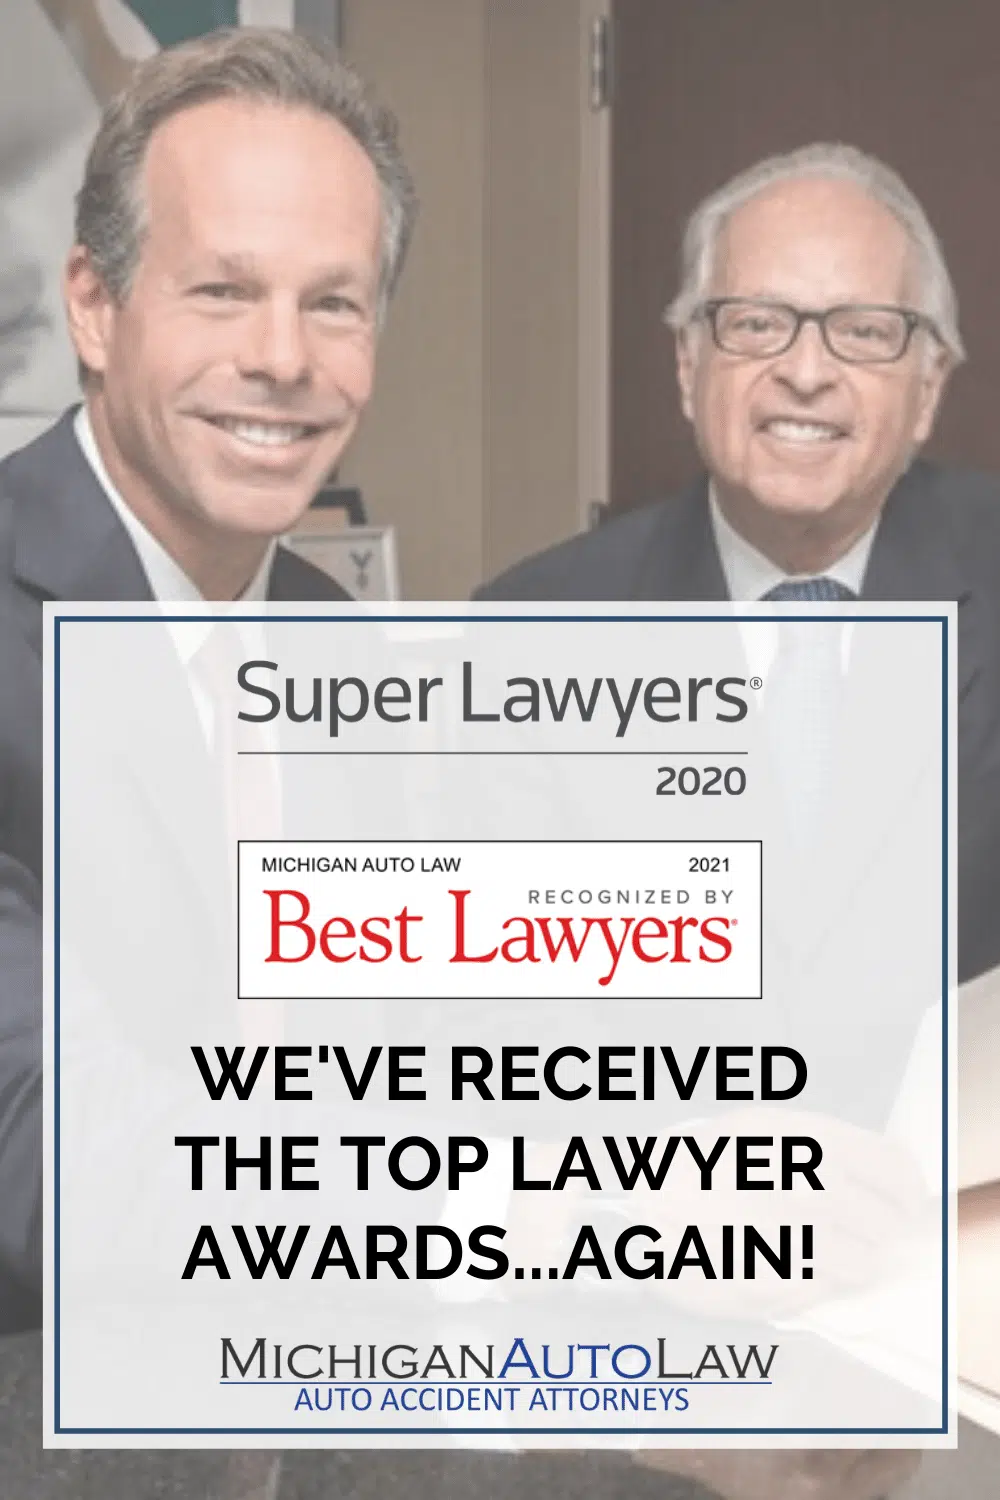 Michigan Auto Law attorneys voted Super Lawyers 2020 and Best Lawyers in America 2021